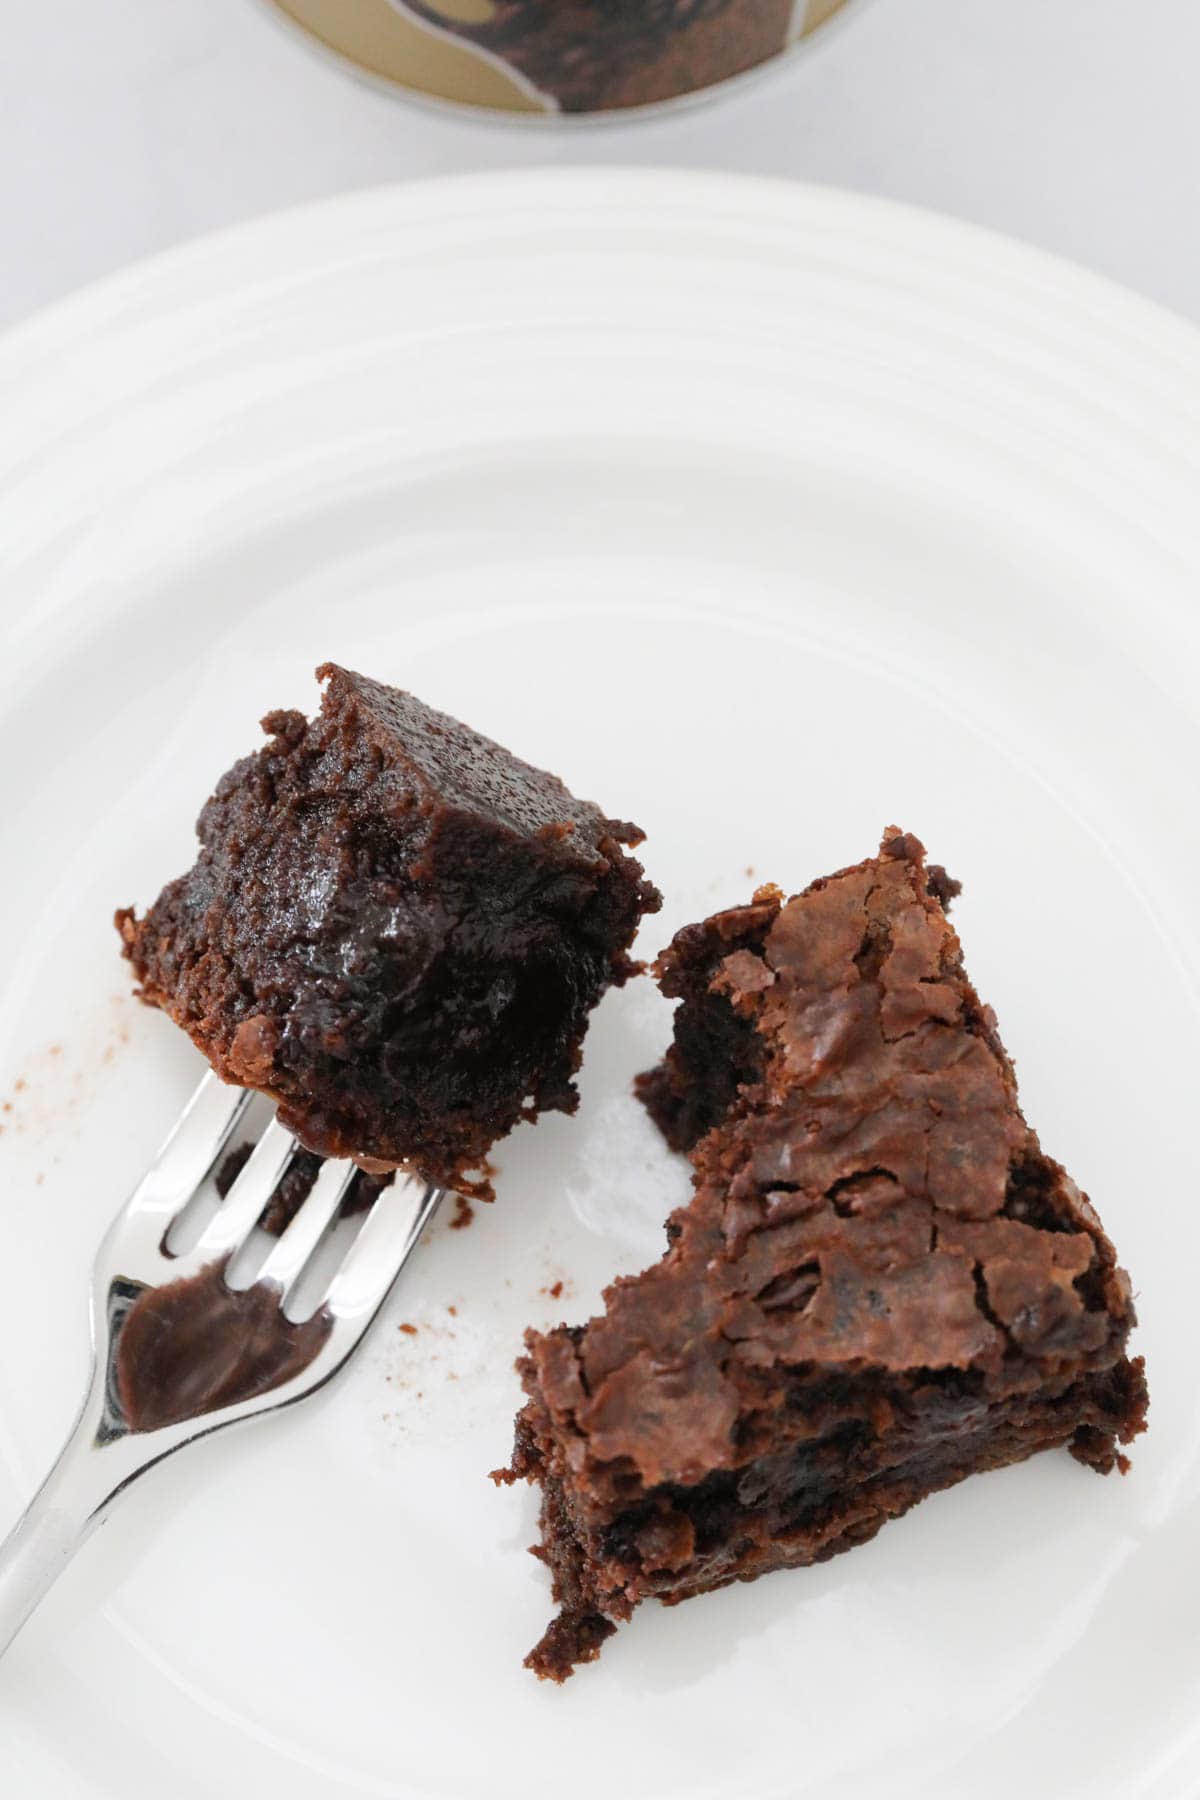 A square of brownie on a plate, with some on a fork beside.